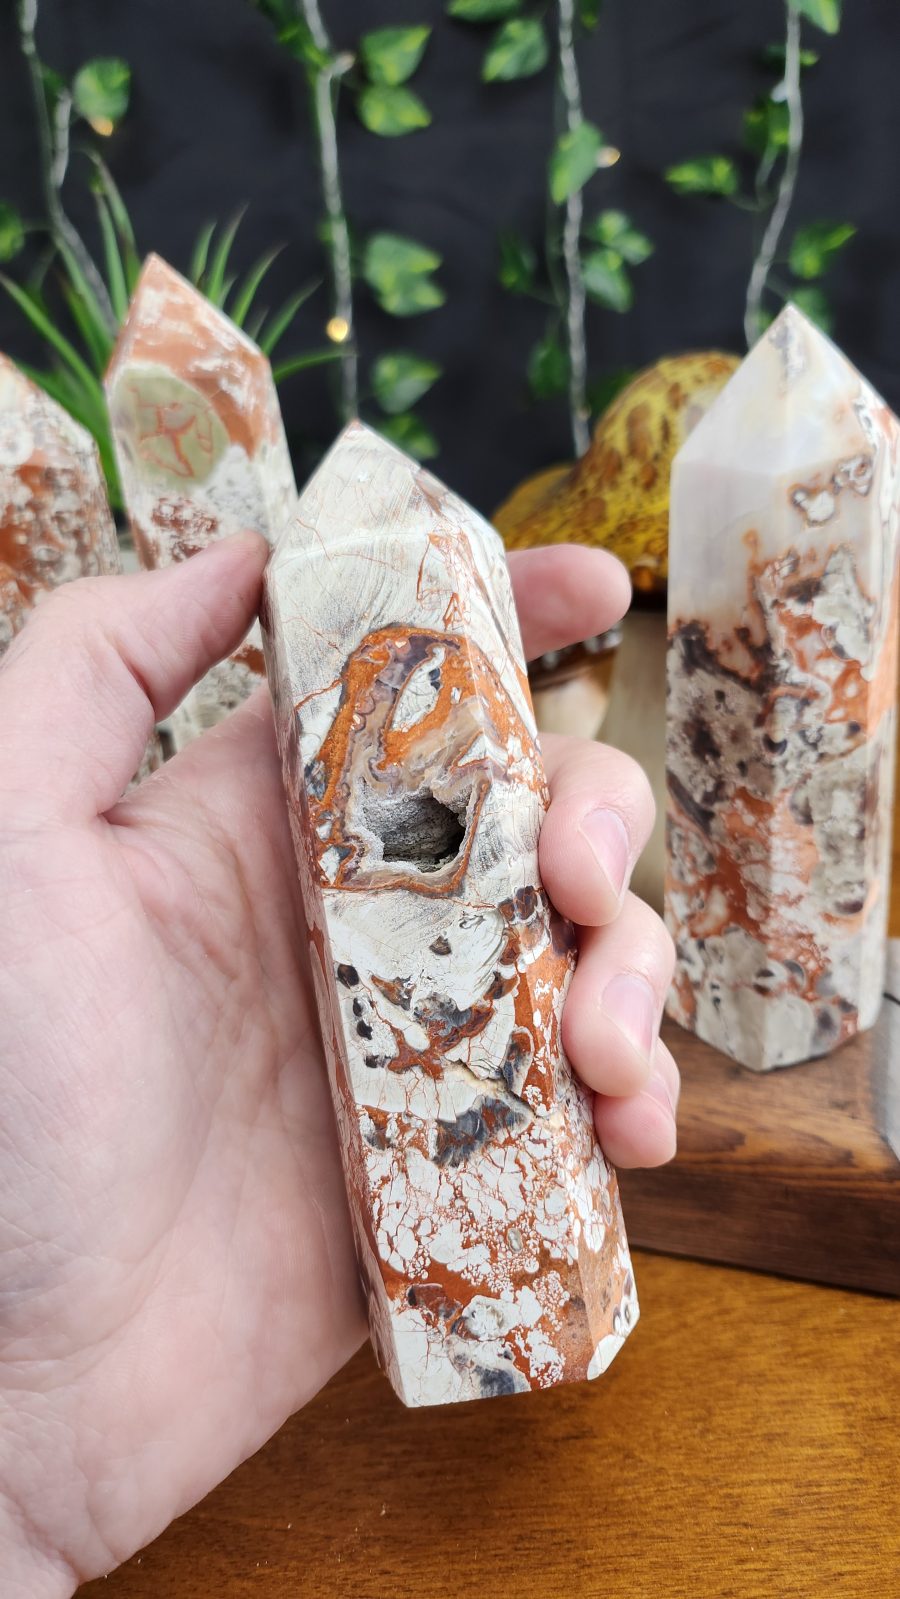 Money Agate Large Crystal Towers shown in hand for scale.